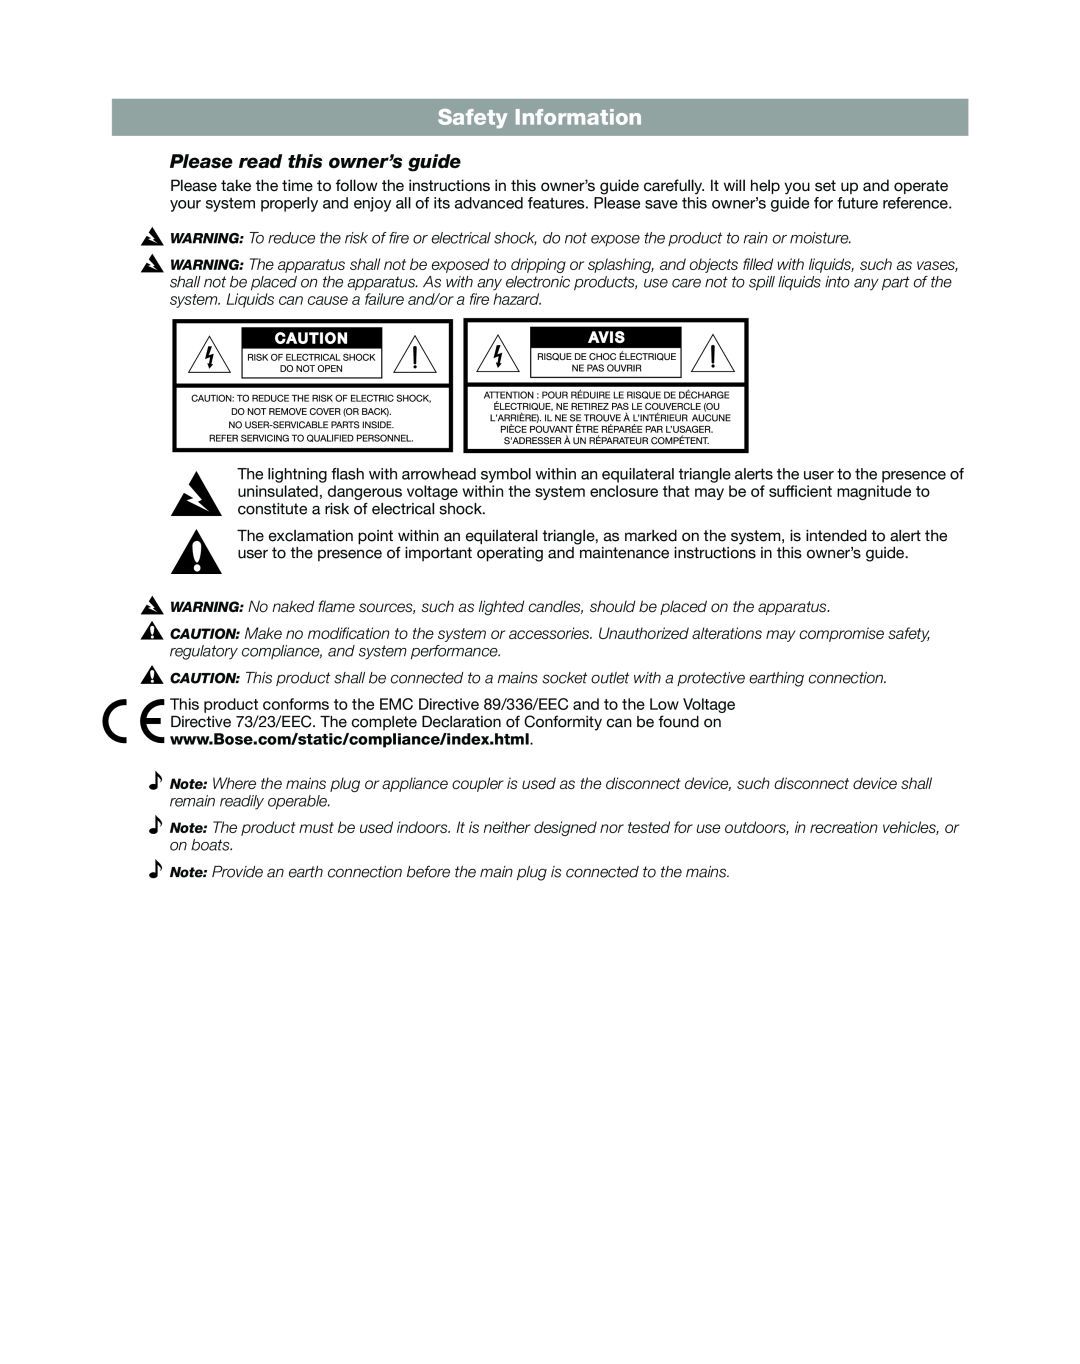 Bose DXA2120 manual Safety Information, Please read this owner’s guide 